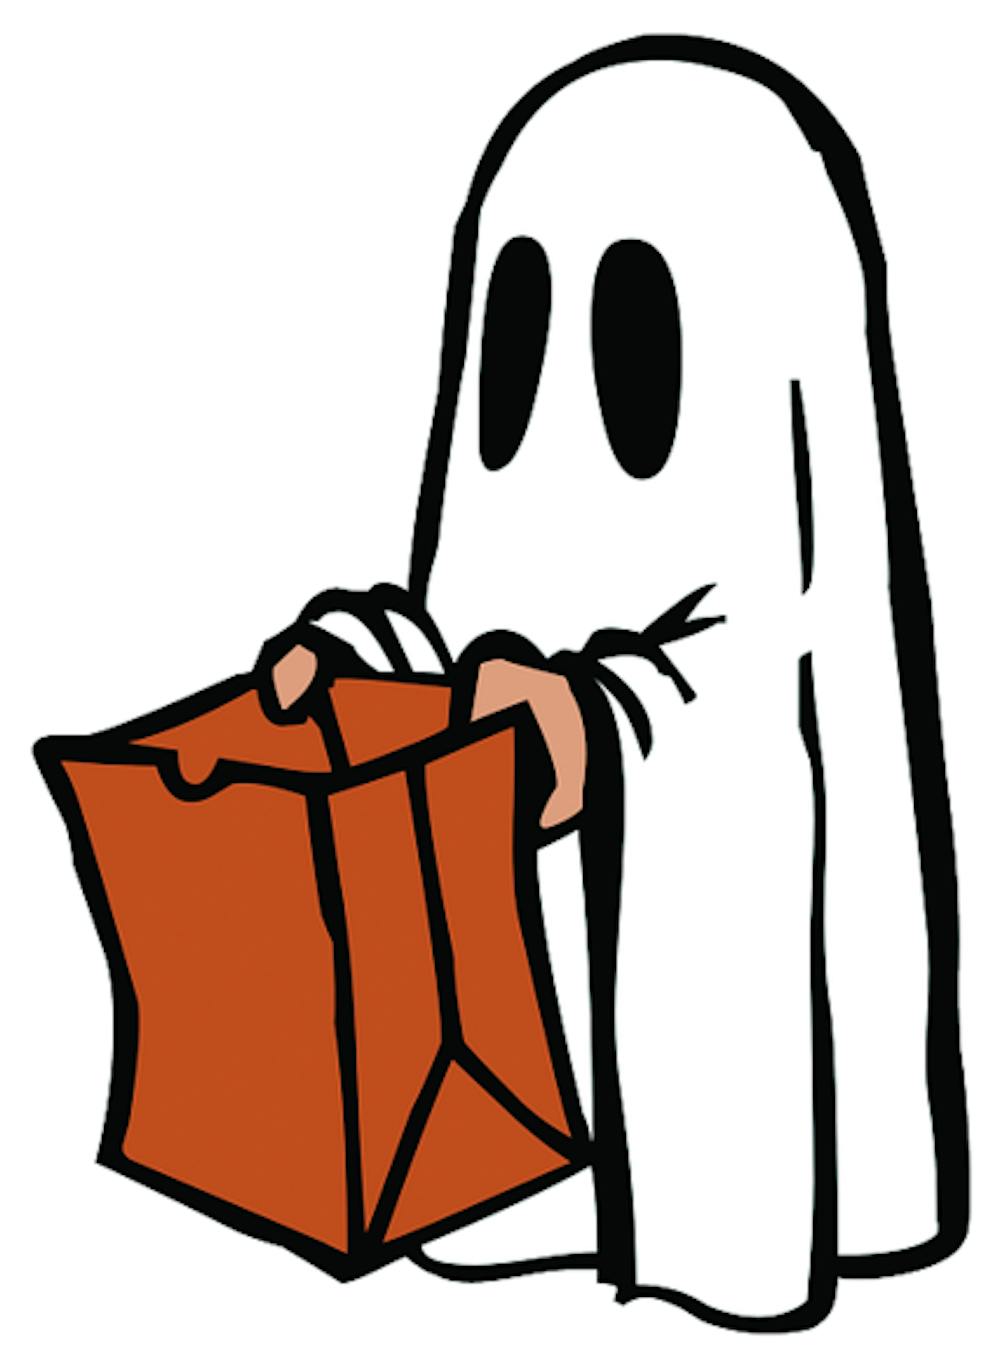 All you need is a white sheet & a pair of scissors for this classic ghost costume.